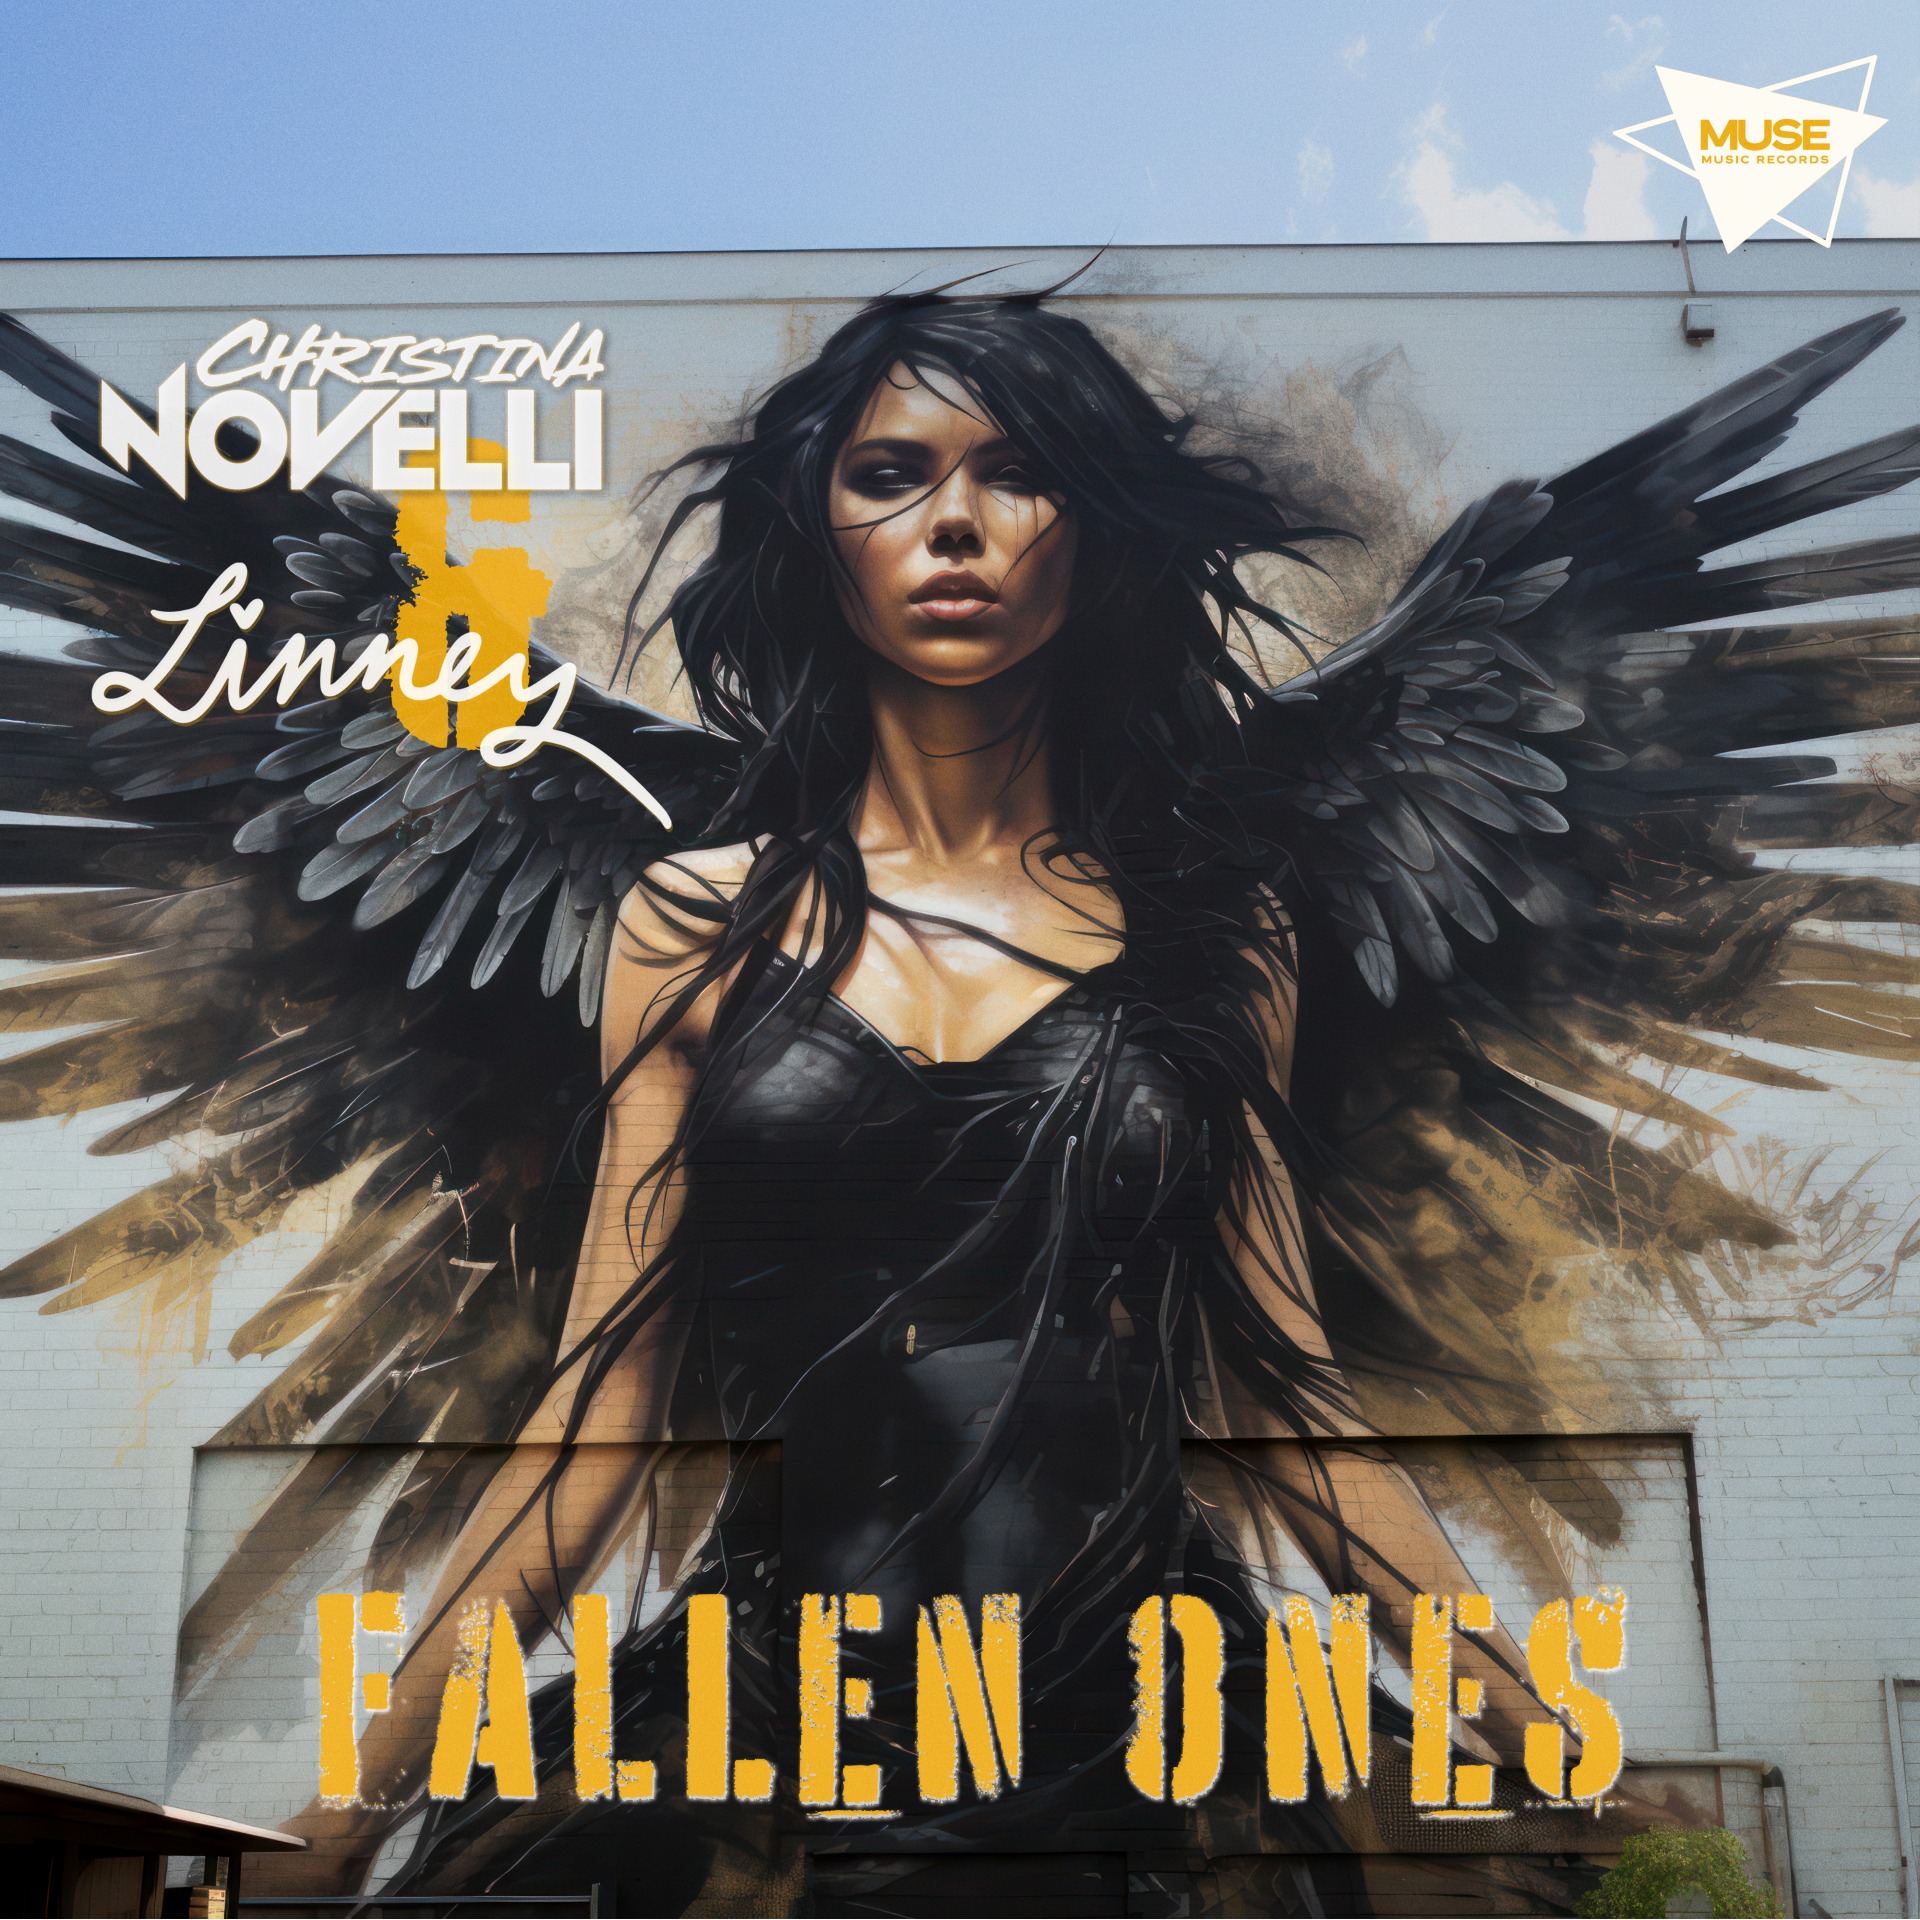 Christina Novelli and Linney presents Fallen Ones on Black Hole Recordings